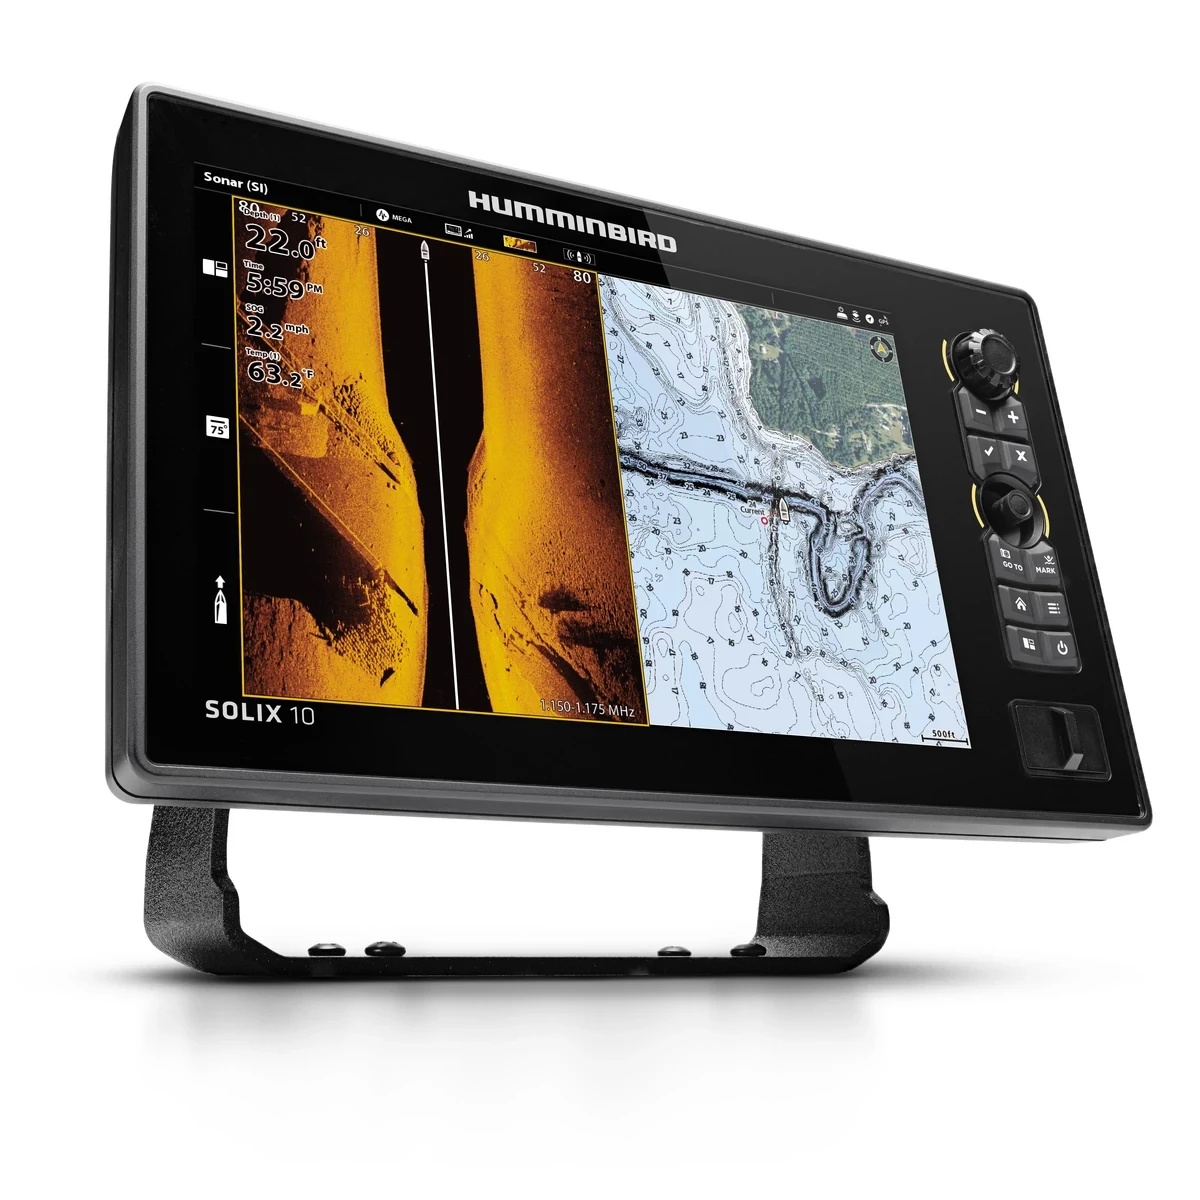 SOLIX 10 CHIRP MEGA SI+ GPS G3 front-side Side Imaging view